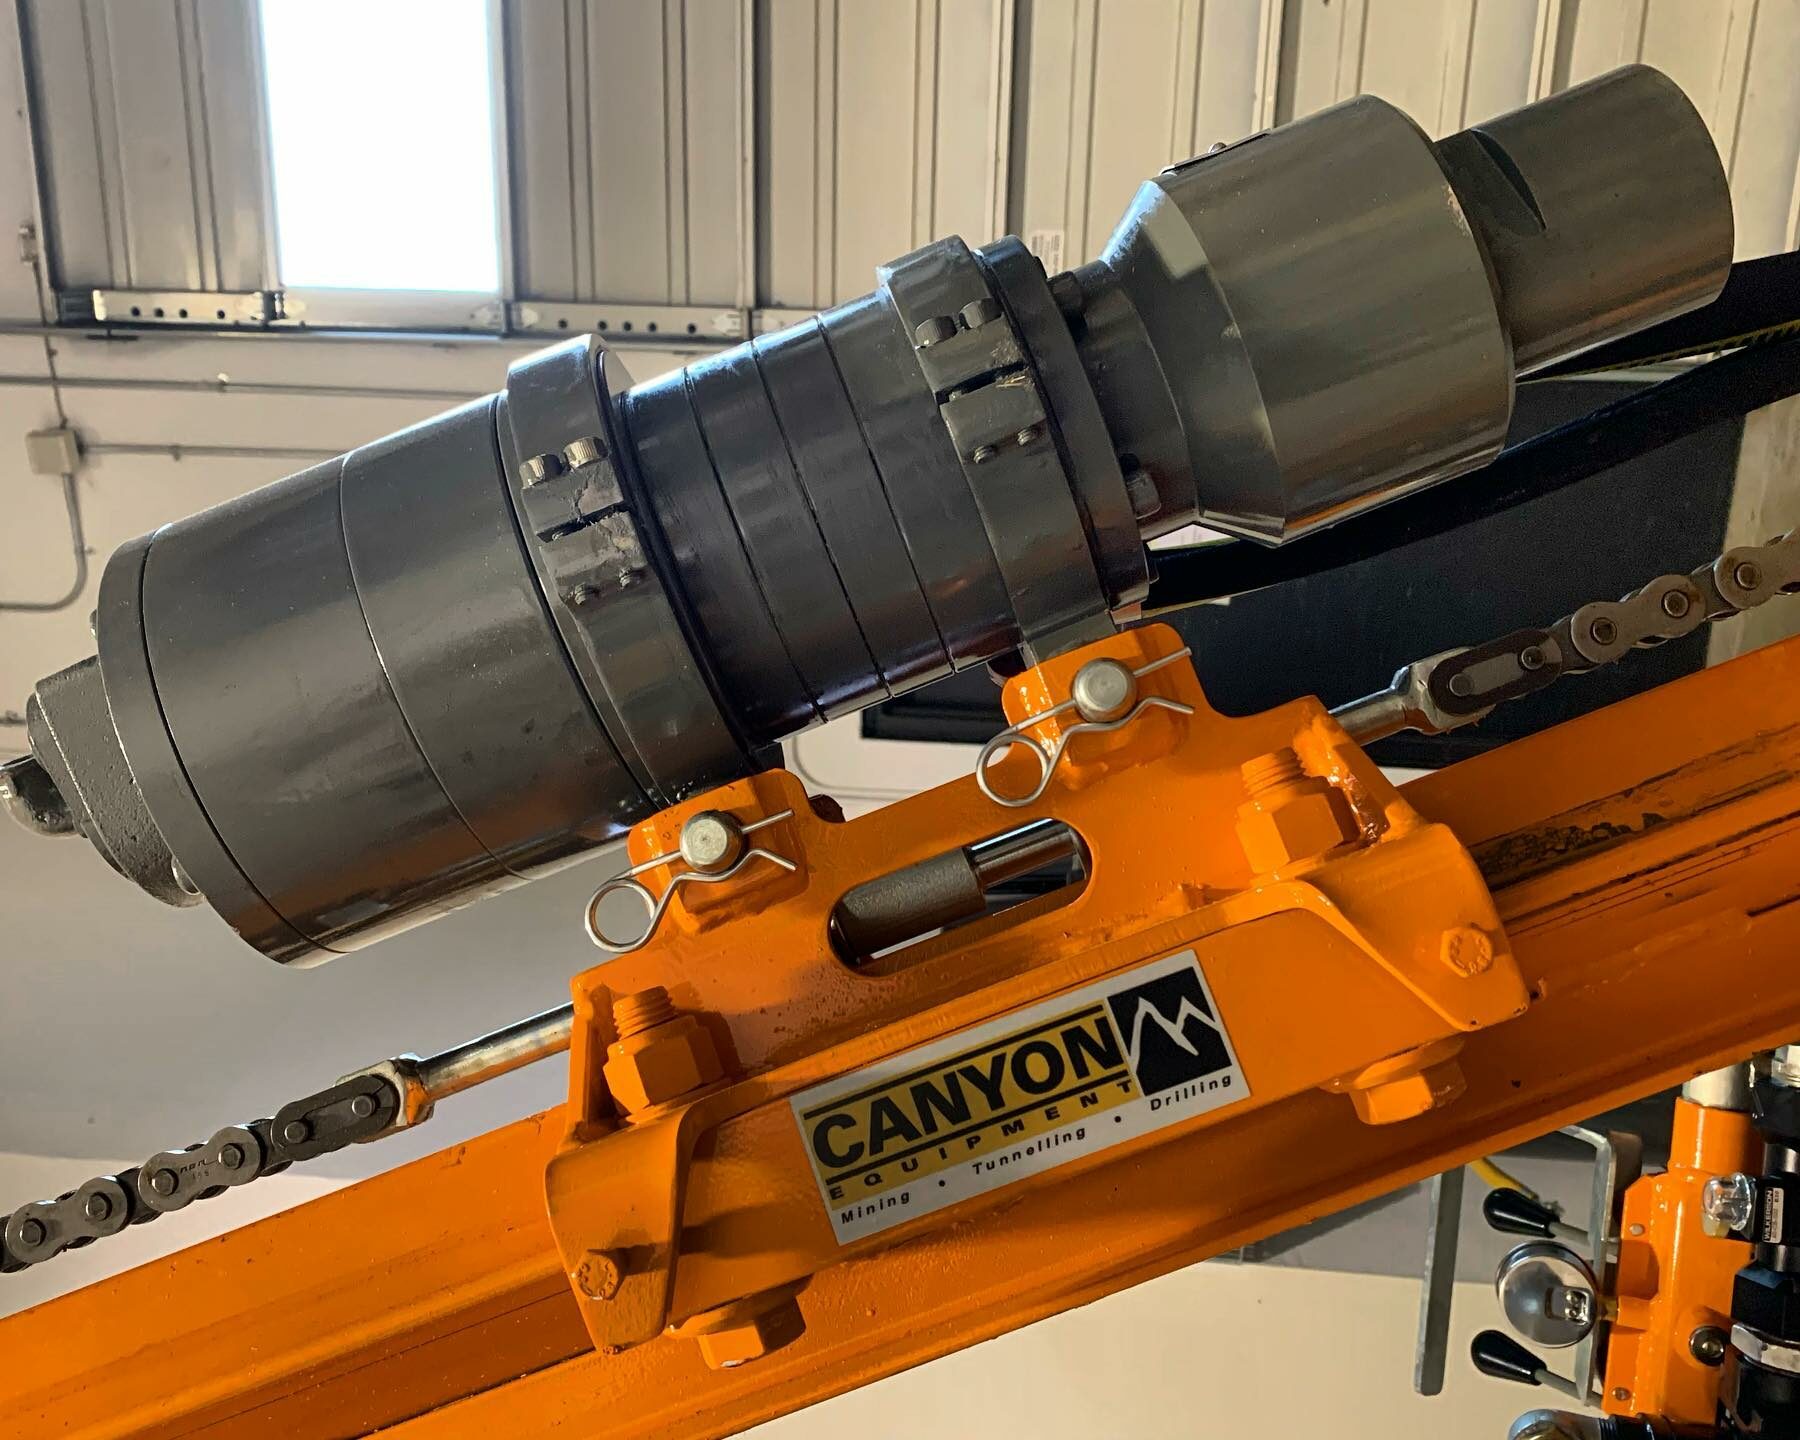 Image of drill from Canyon Equipment.